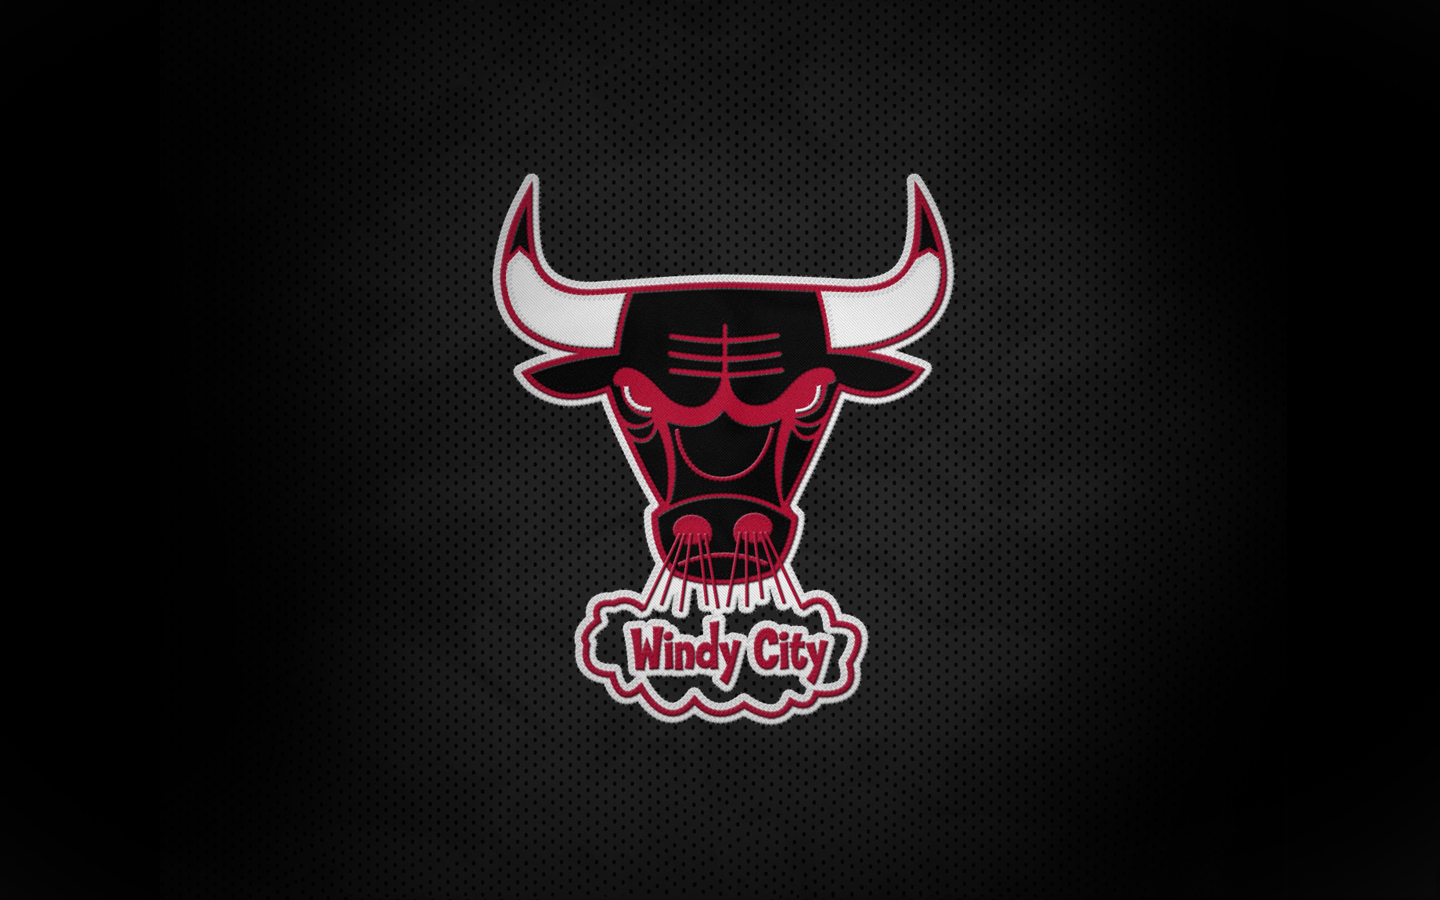 Chicago Bulls Wallpapers - Top Free Chicago Bulls Backgrounds